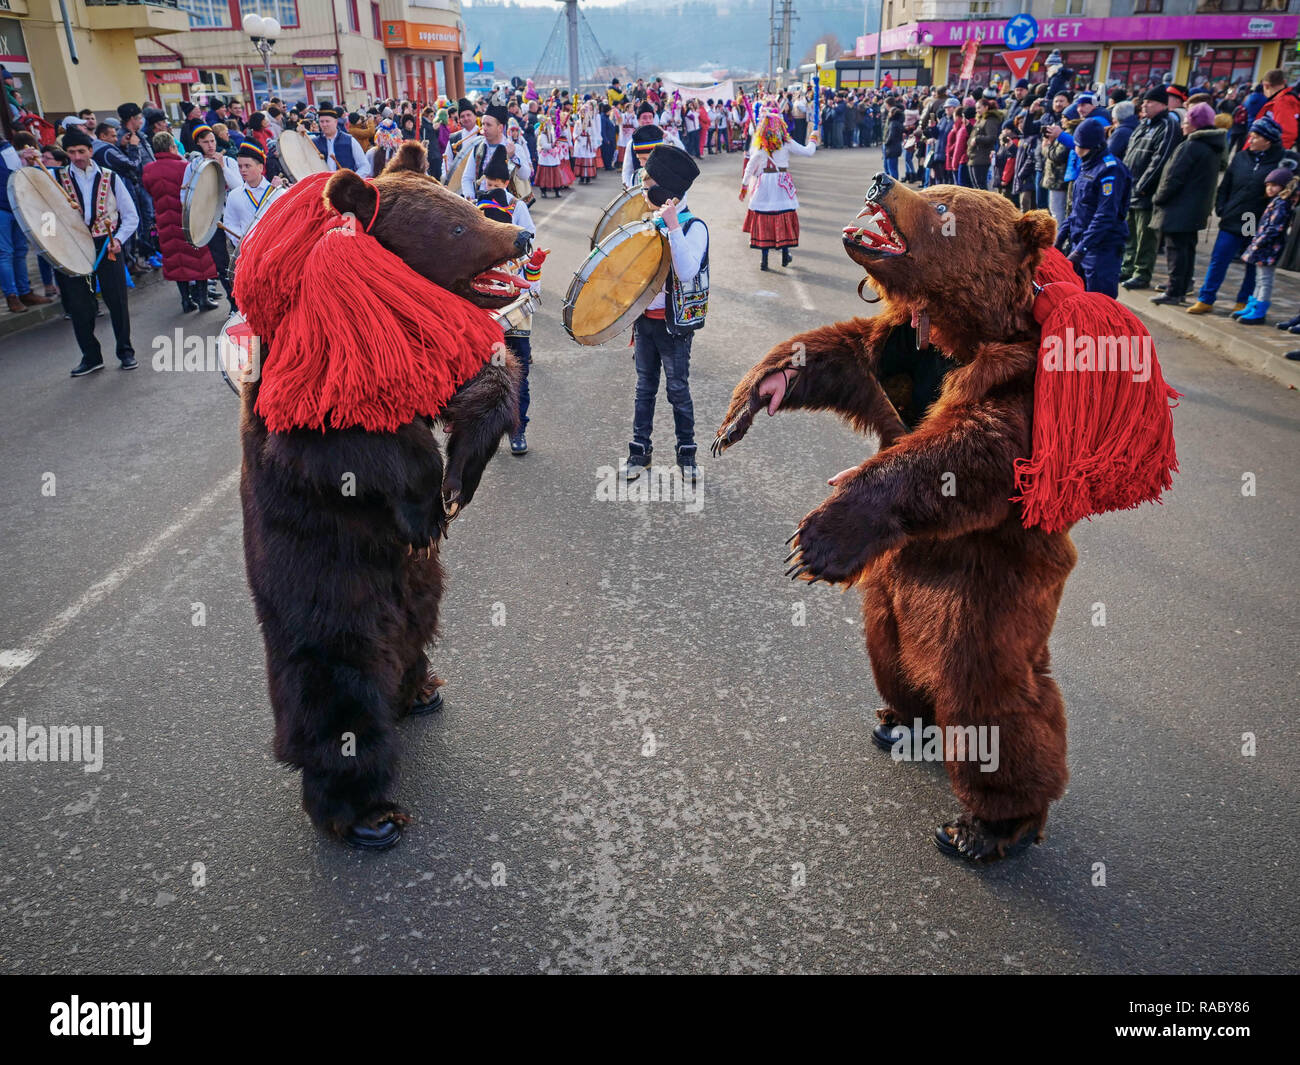 People seen dressed in bear skins dancing during the event. At the end of the year and the New Year ís Day, people in Trotus Valley in Romania dress into bear skins and dance to chase everything bad and bring happiness and blessing to the village people. In the past, Roma people were raising wild bears and performed with them to earn money. People believed that bears can heal illnesses and bring strength to them. After keeping bears was forbidden, people started to dance in bear skins to keep the New Year tradition. The price of a skin can be as high as 3000 euro. Stock Photo